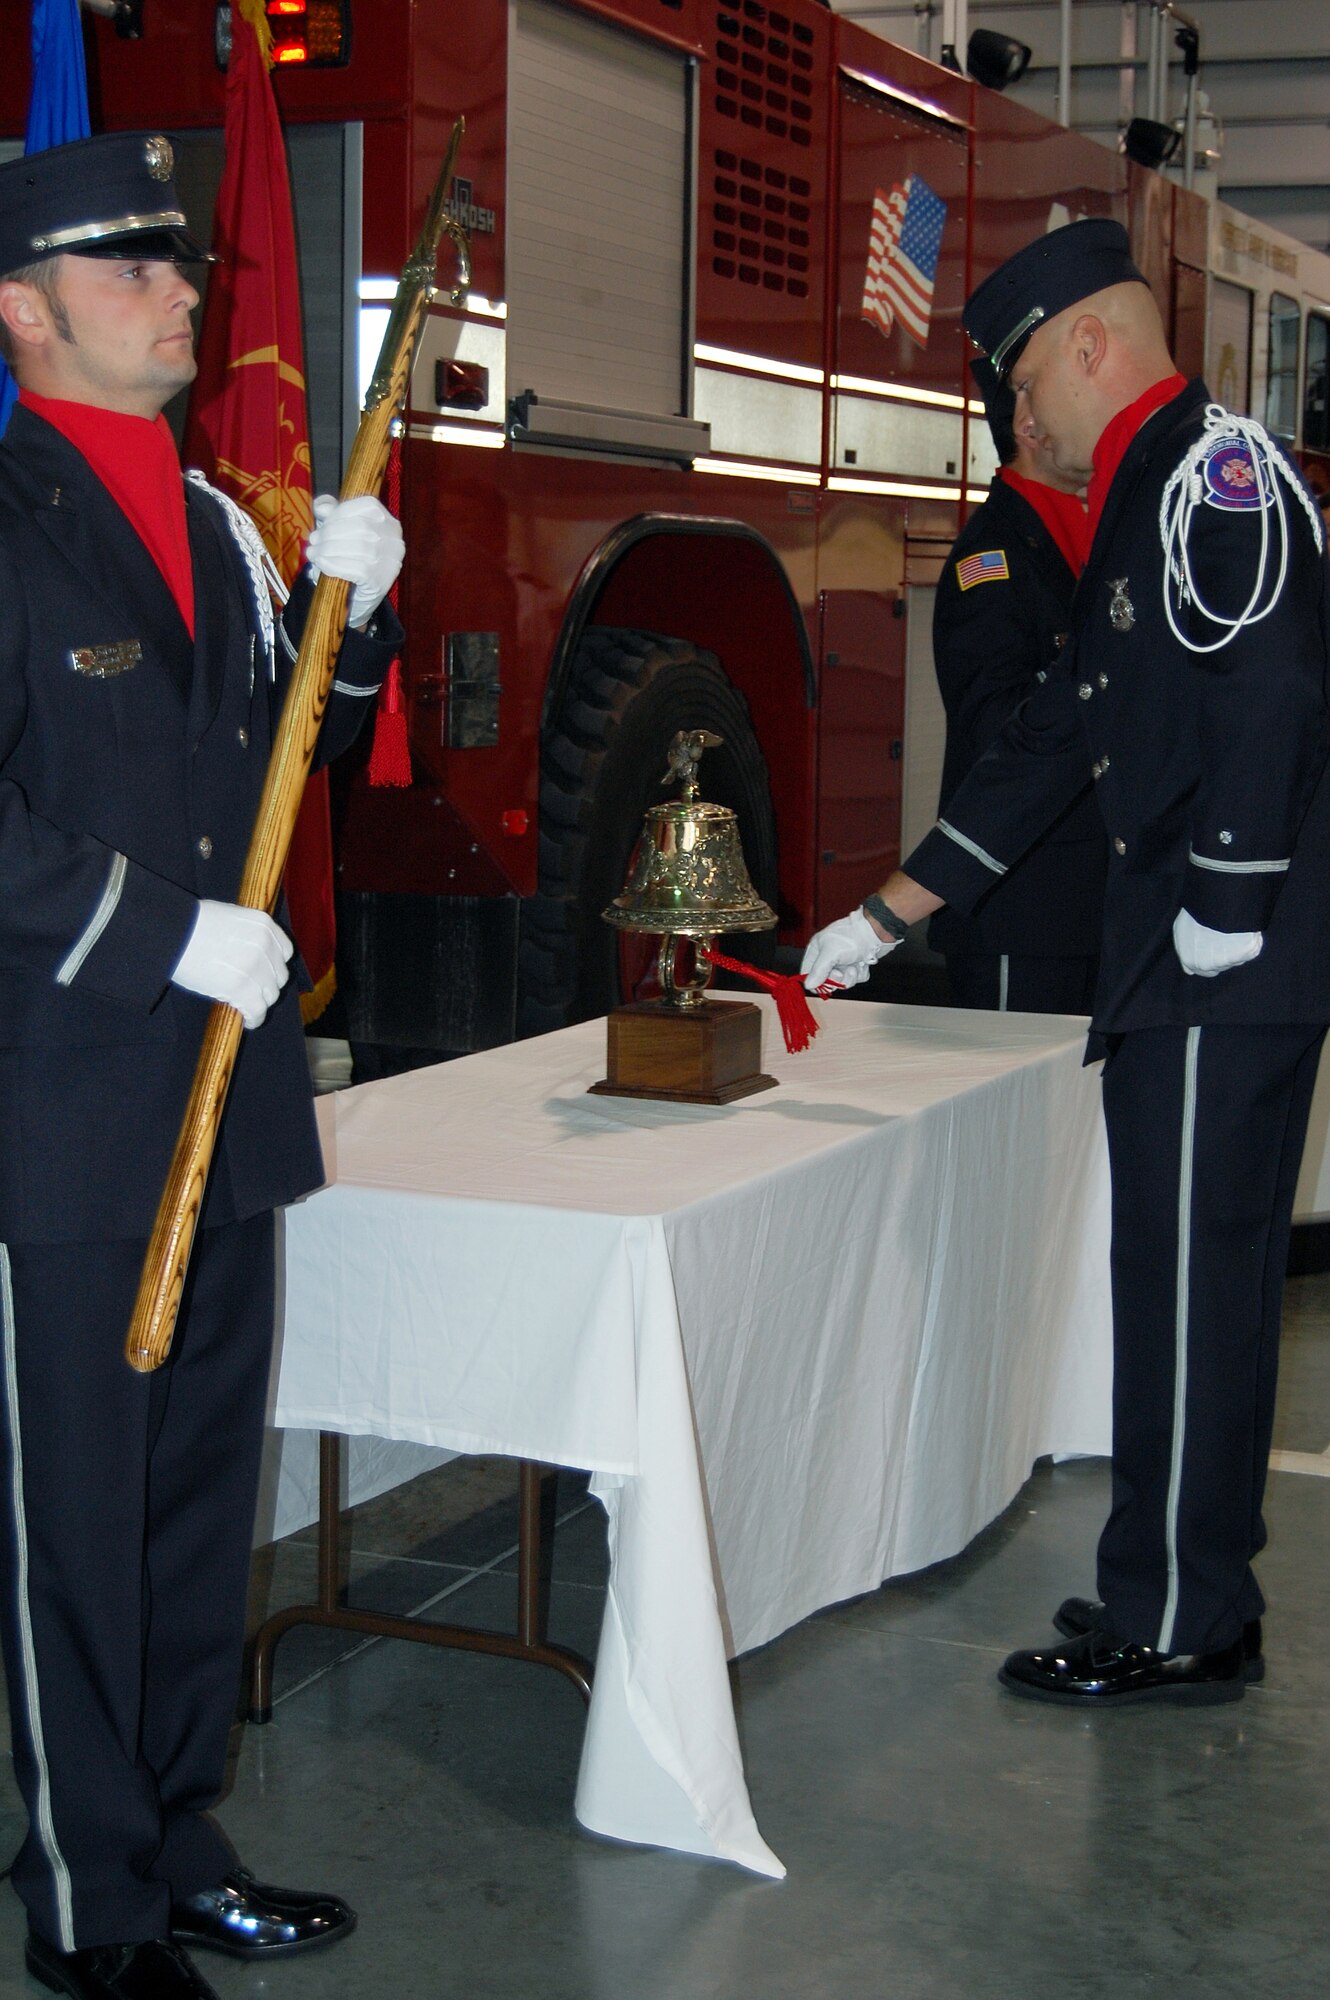 OFFUTT AIR FORCE BASE, Neb. - Ceremonial guard member Firefighter Brent Bergstrom rings the fire station bell as part of the Offutt Fire Department's 9/11 Remembrance Ceremony Sept. 10 in the bay of the fire station while ceremonial guard member Firefighter Ron Dawson stand at attention.  The annual ceremony, held during morning roll call, included the final alarm given to honor firefighters who have lost their lives in the line of duty. According to Station Chief Roger Filter, the tradition of the final alarm, consiting of two sets of five bell rings, dates back to the days of horse and buggy firefighters when alarm boxes were located around cities so people could notify fire departments of fires. They were also used  to notify citizens of the death of a firefighter.  U.S. Air Force photo by Debbie Aragon